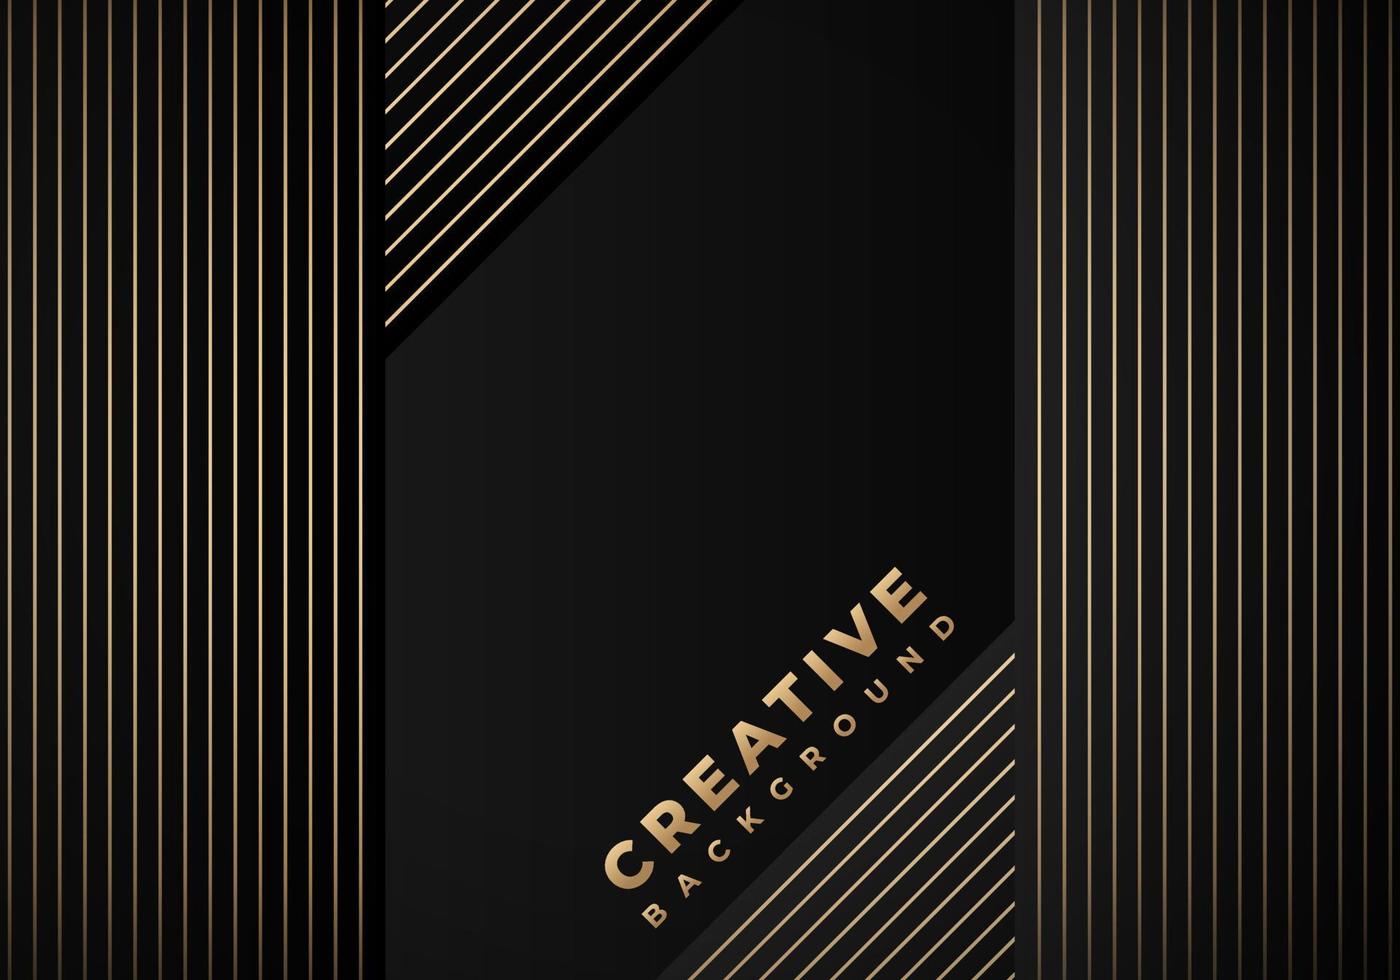 Luxury Stripes Golden Lines Diagonal Overlap on Black Background with Copy Space for Text vector